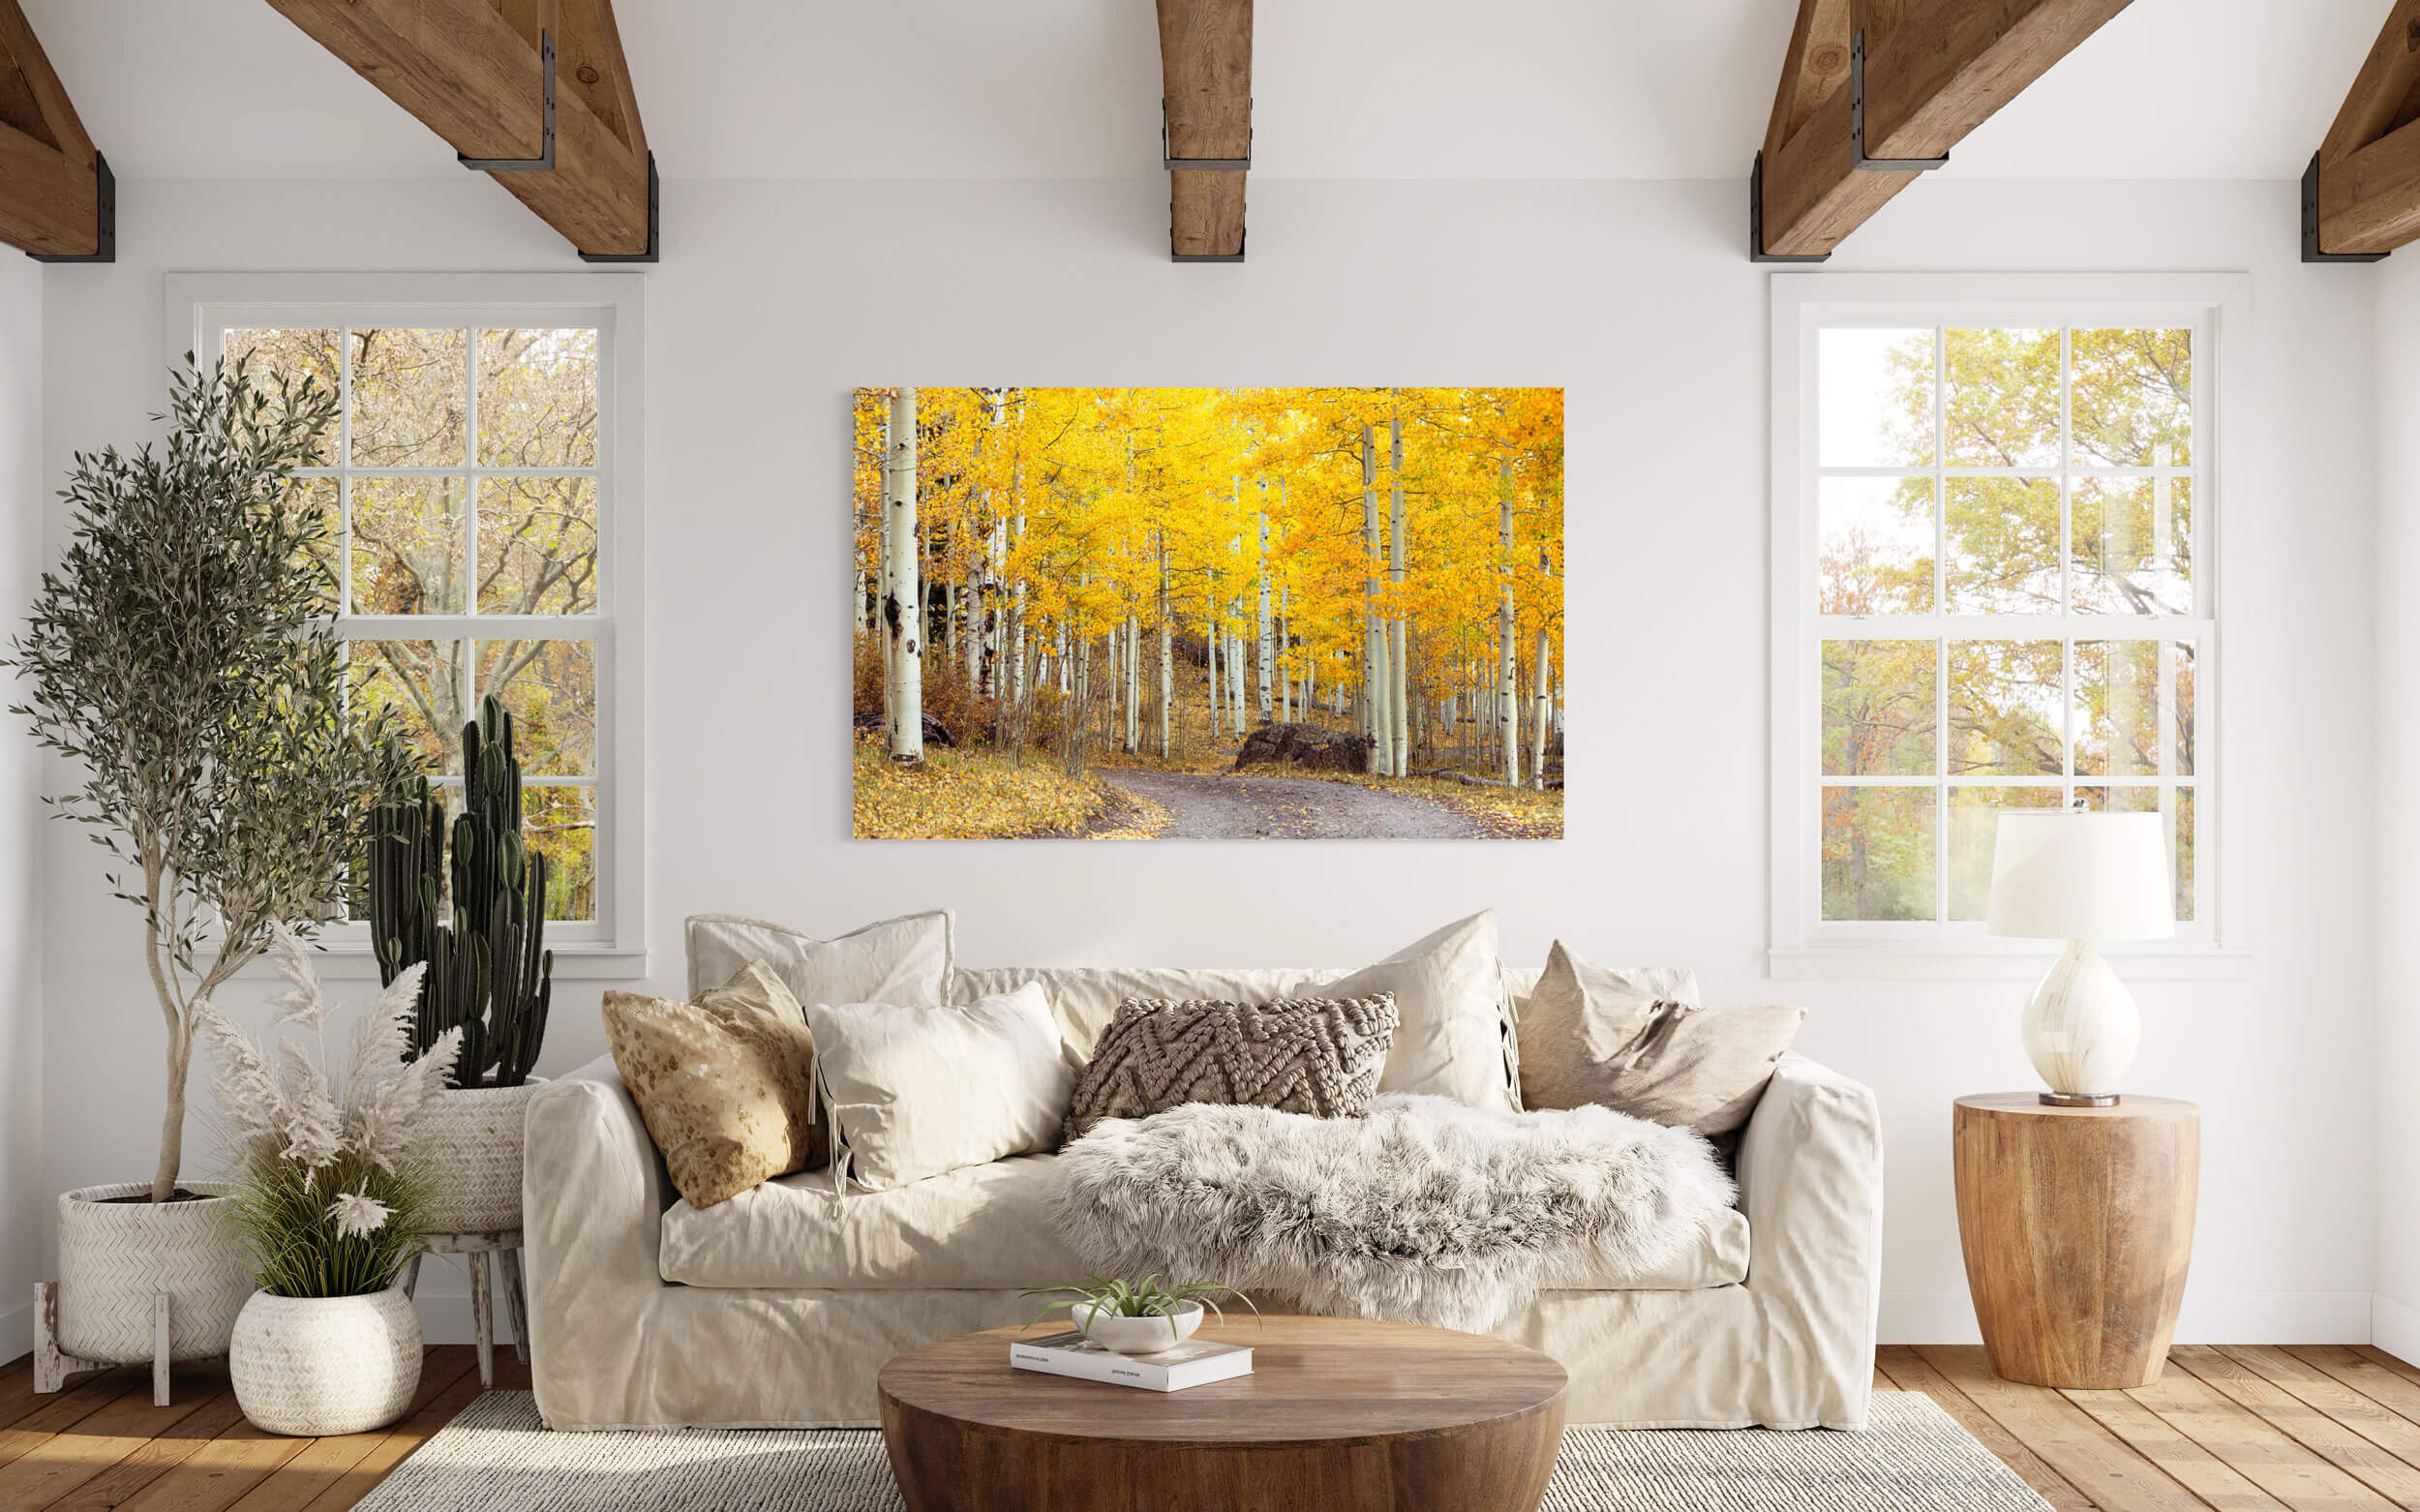 A Colorado fall colors picture from Owl Creek Pass hangs in a living room.